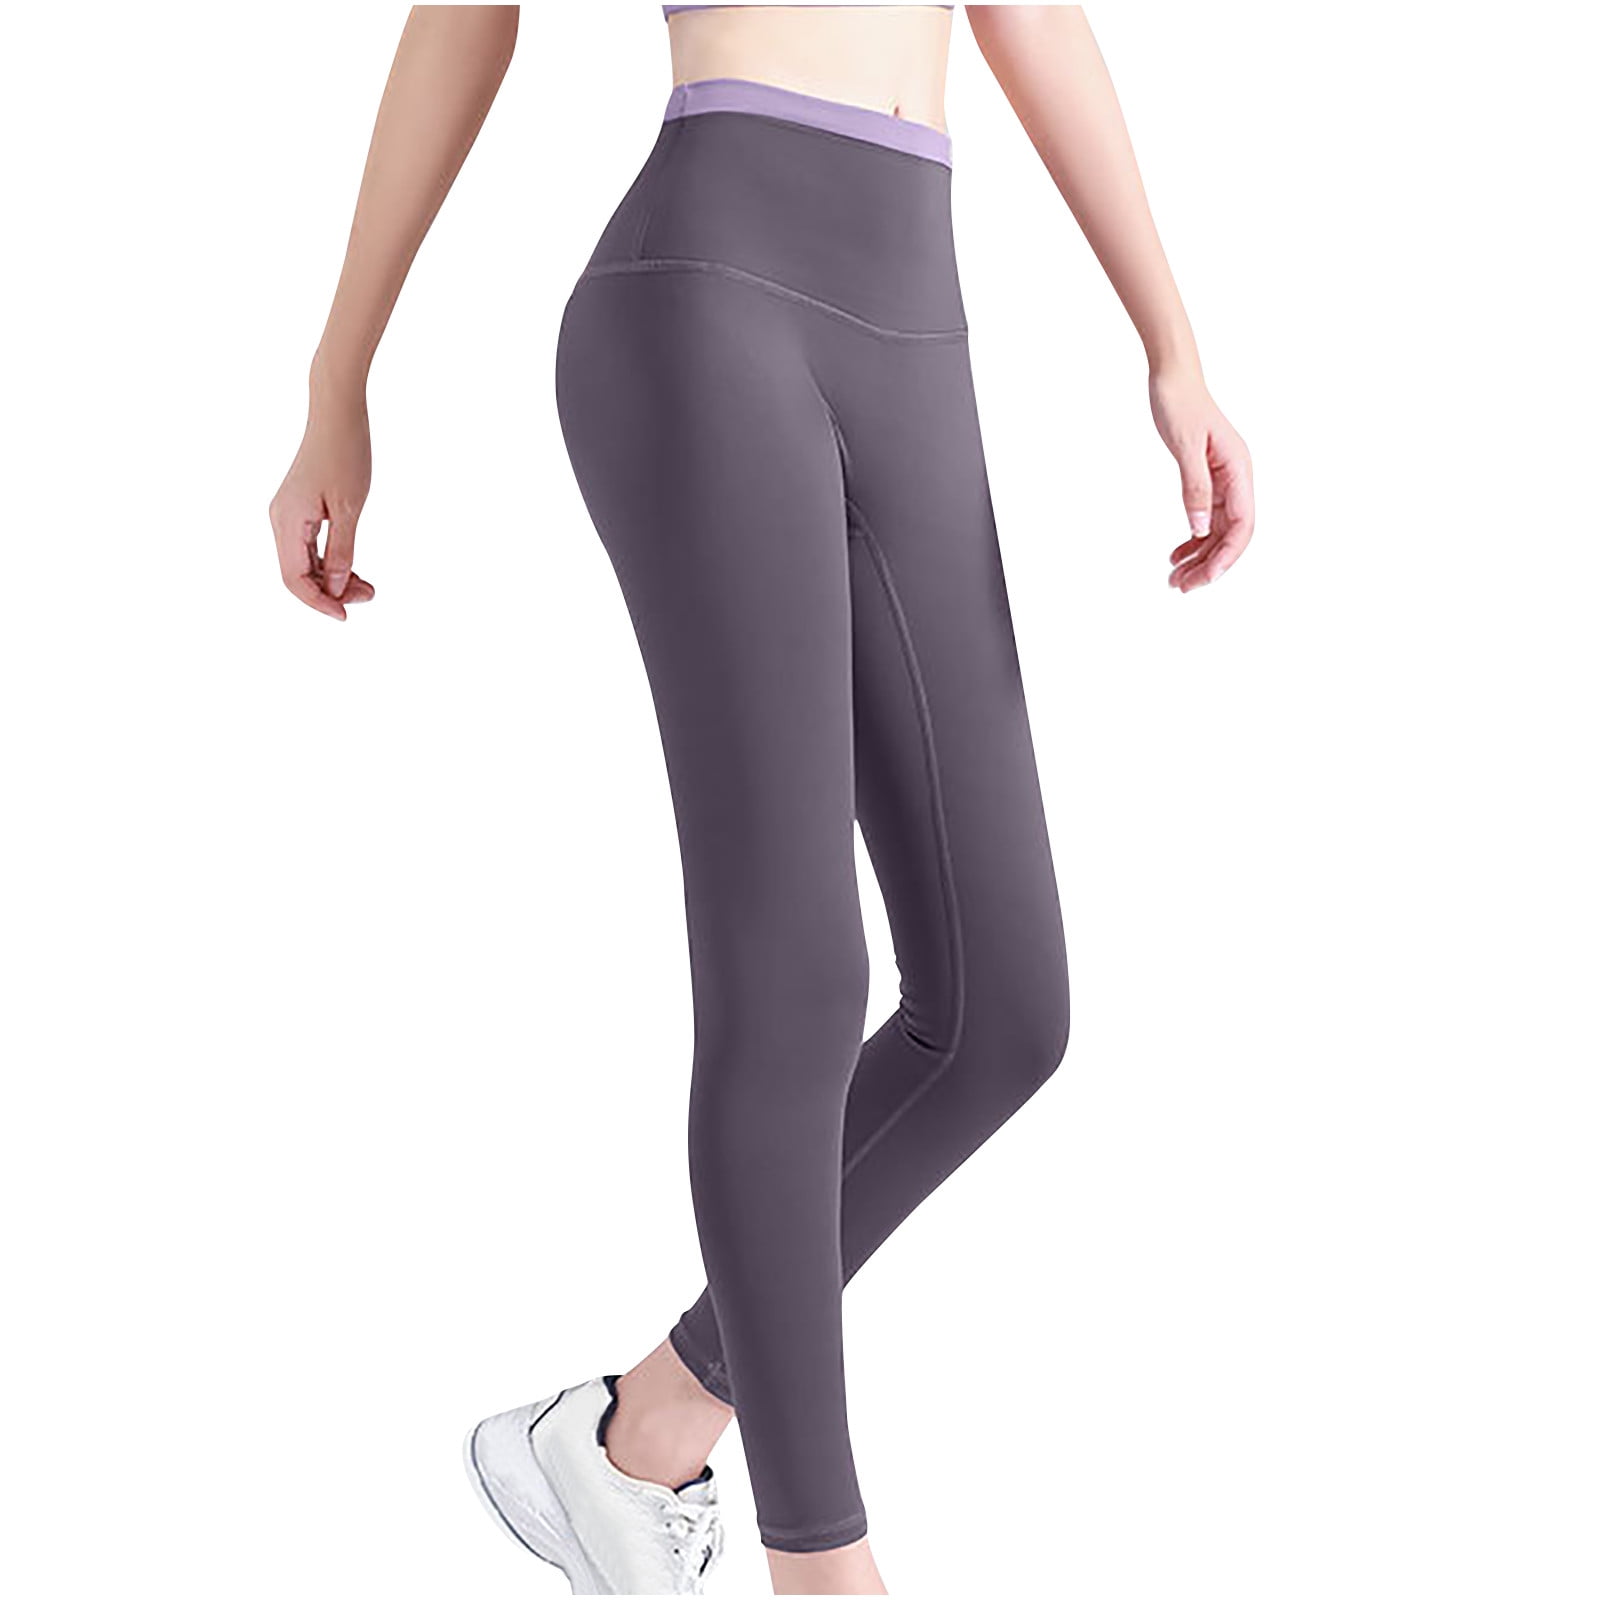 Frehsky yoga pants Fashion Ladies Pure Color Lifting Elastic Fitness Running  Yoga Pants workout leggings for women 